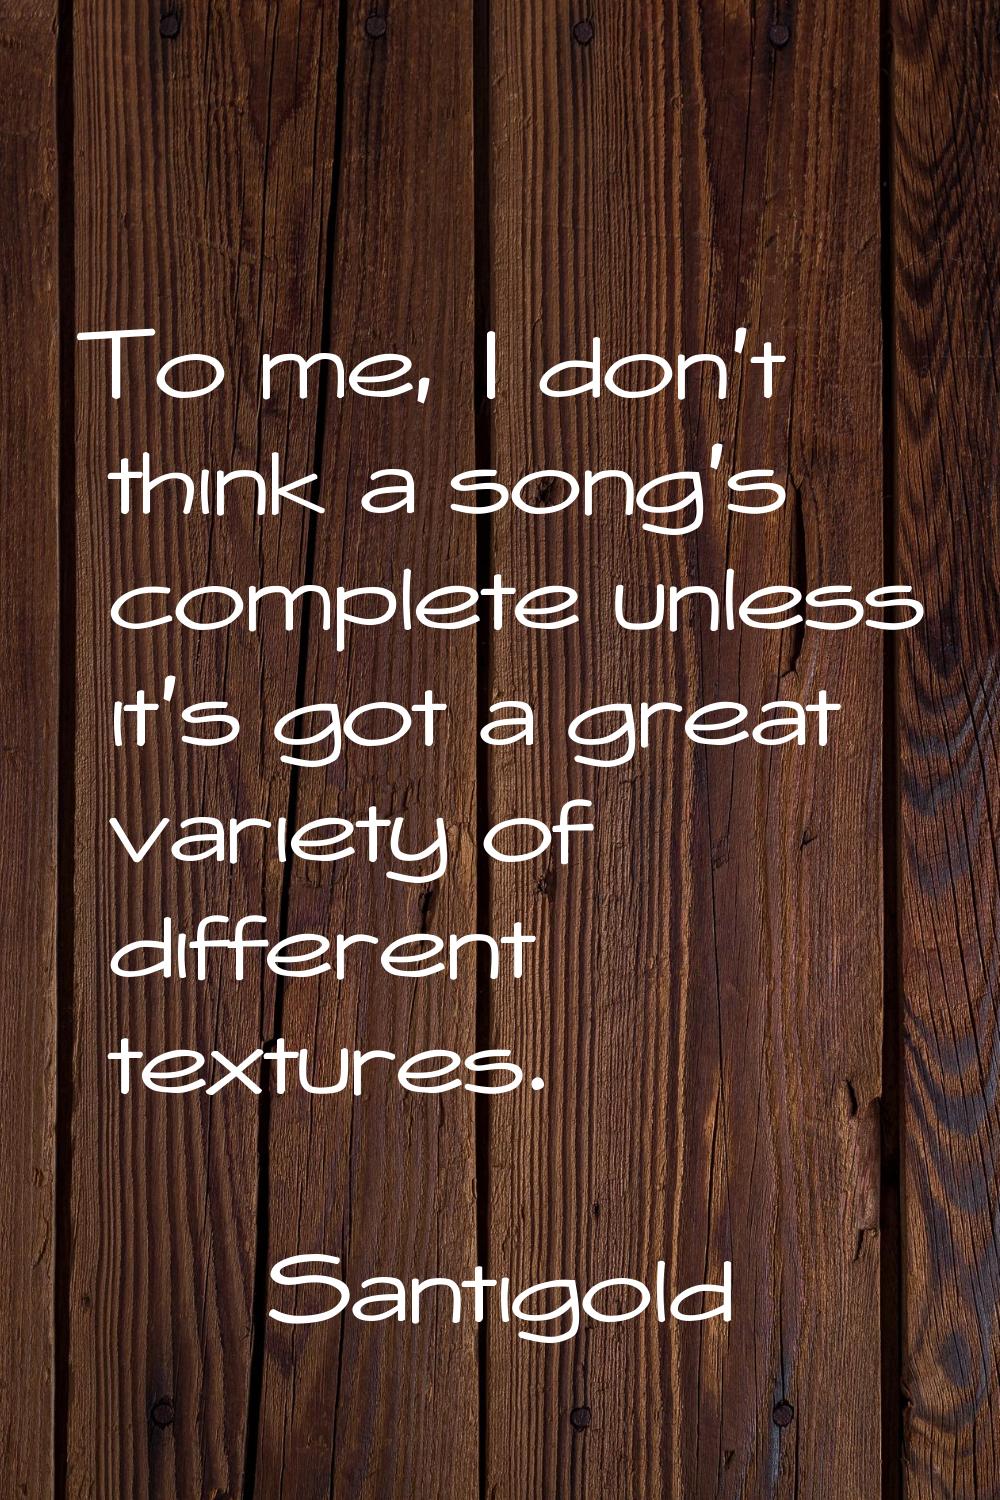 To me, I don't think a song's complete unless it's got a great variety of different textures.